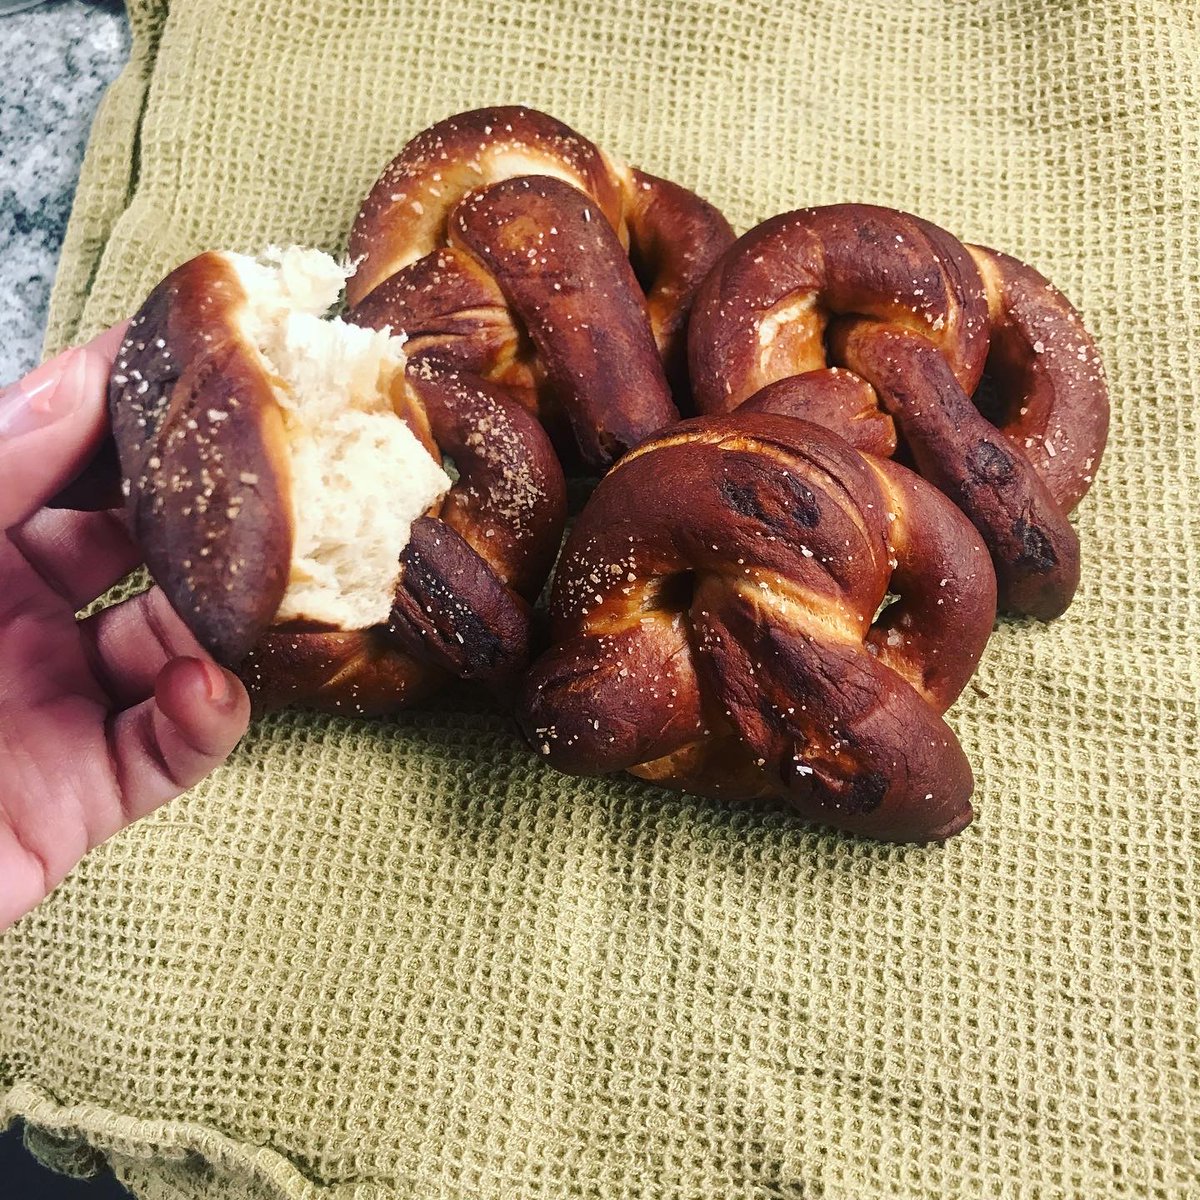 Bread #35: Ballpark Pretzels. These were special for me because I have a big soft pretzel-shaped space in my heart for big soft pretzels at movies and sporting events & stuff. So making these was a nice way for me to pretend I can go somewhere  they were good & pretzelly.